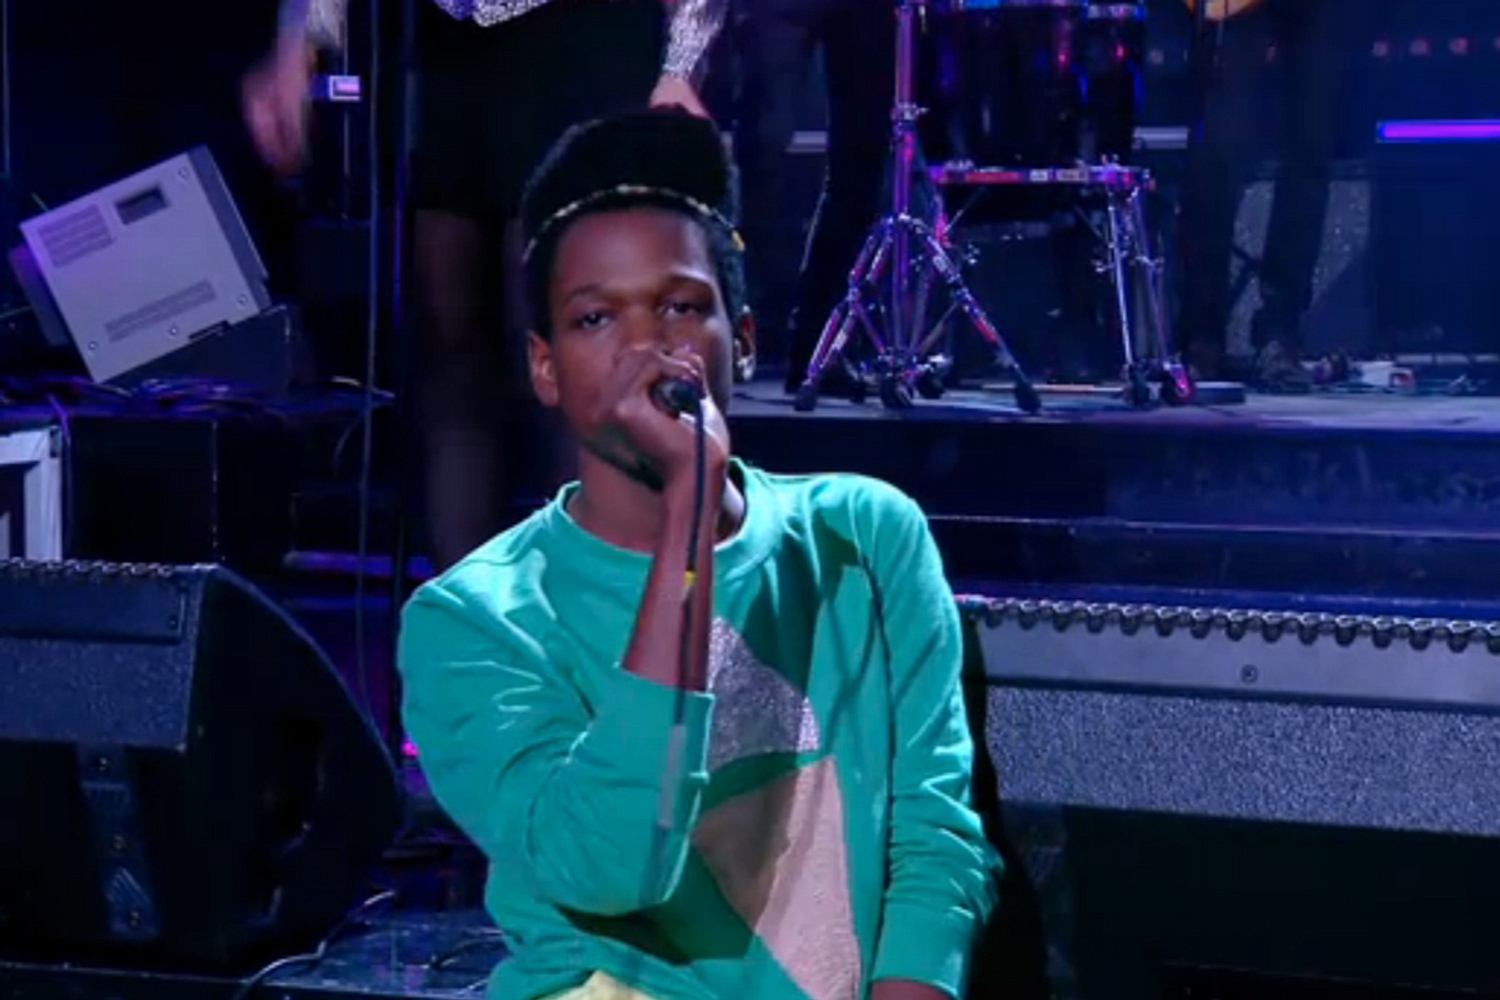 Watch Shamir make TV debut with ‘On the Regular’ on Canal+